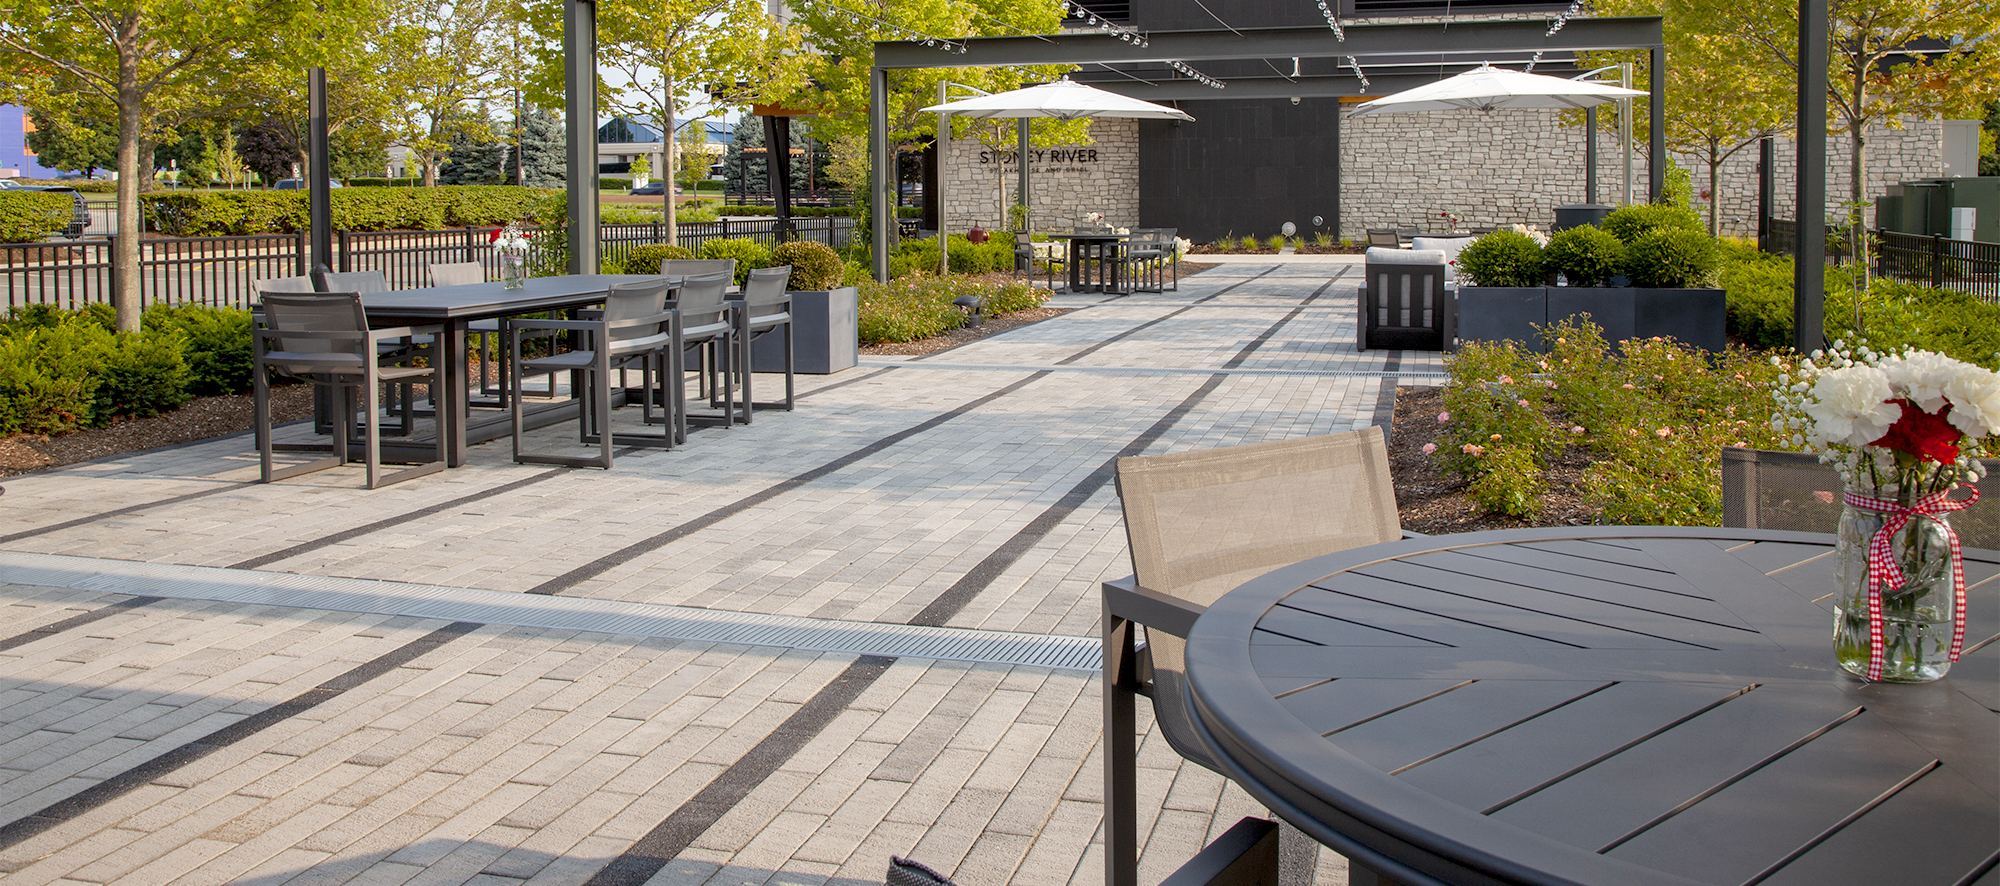 Two-toned Promenade Plank pavers delineate rows of walking spaces, with outdoor tables, chairs and umbrellas.